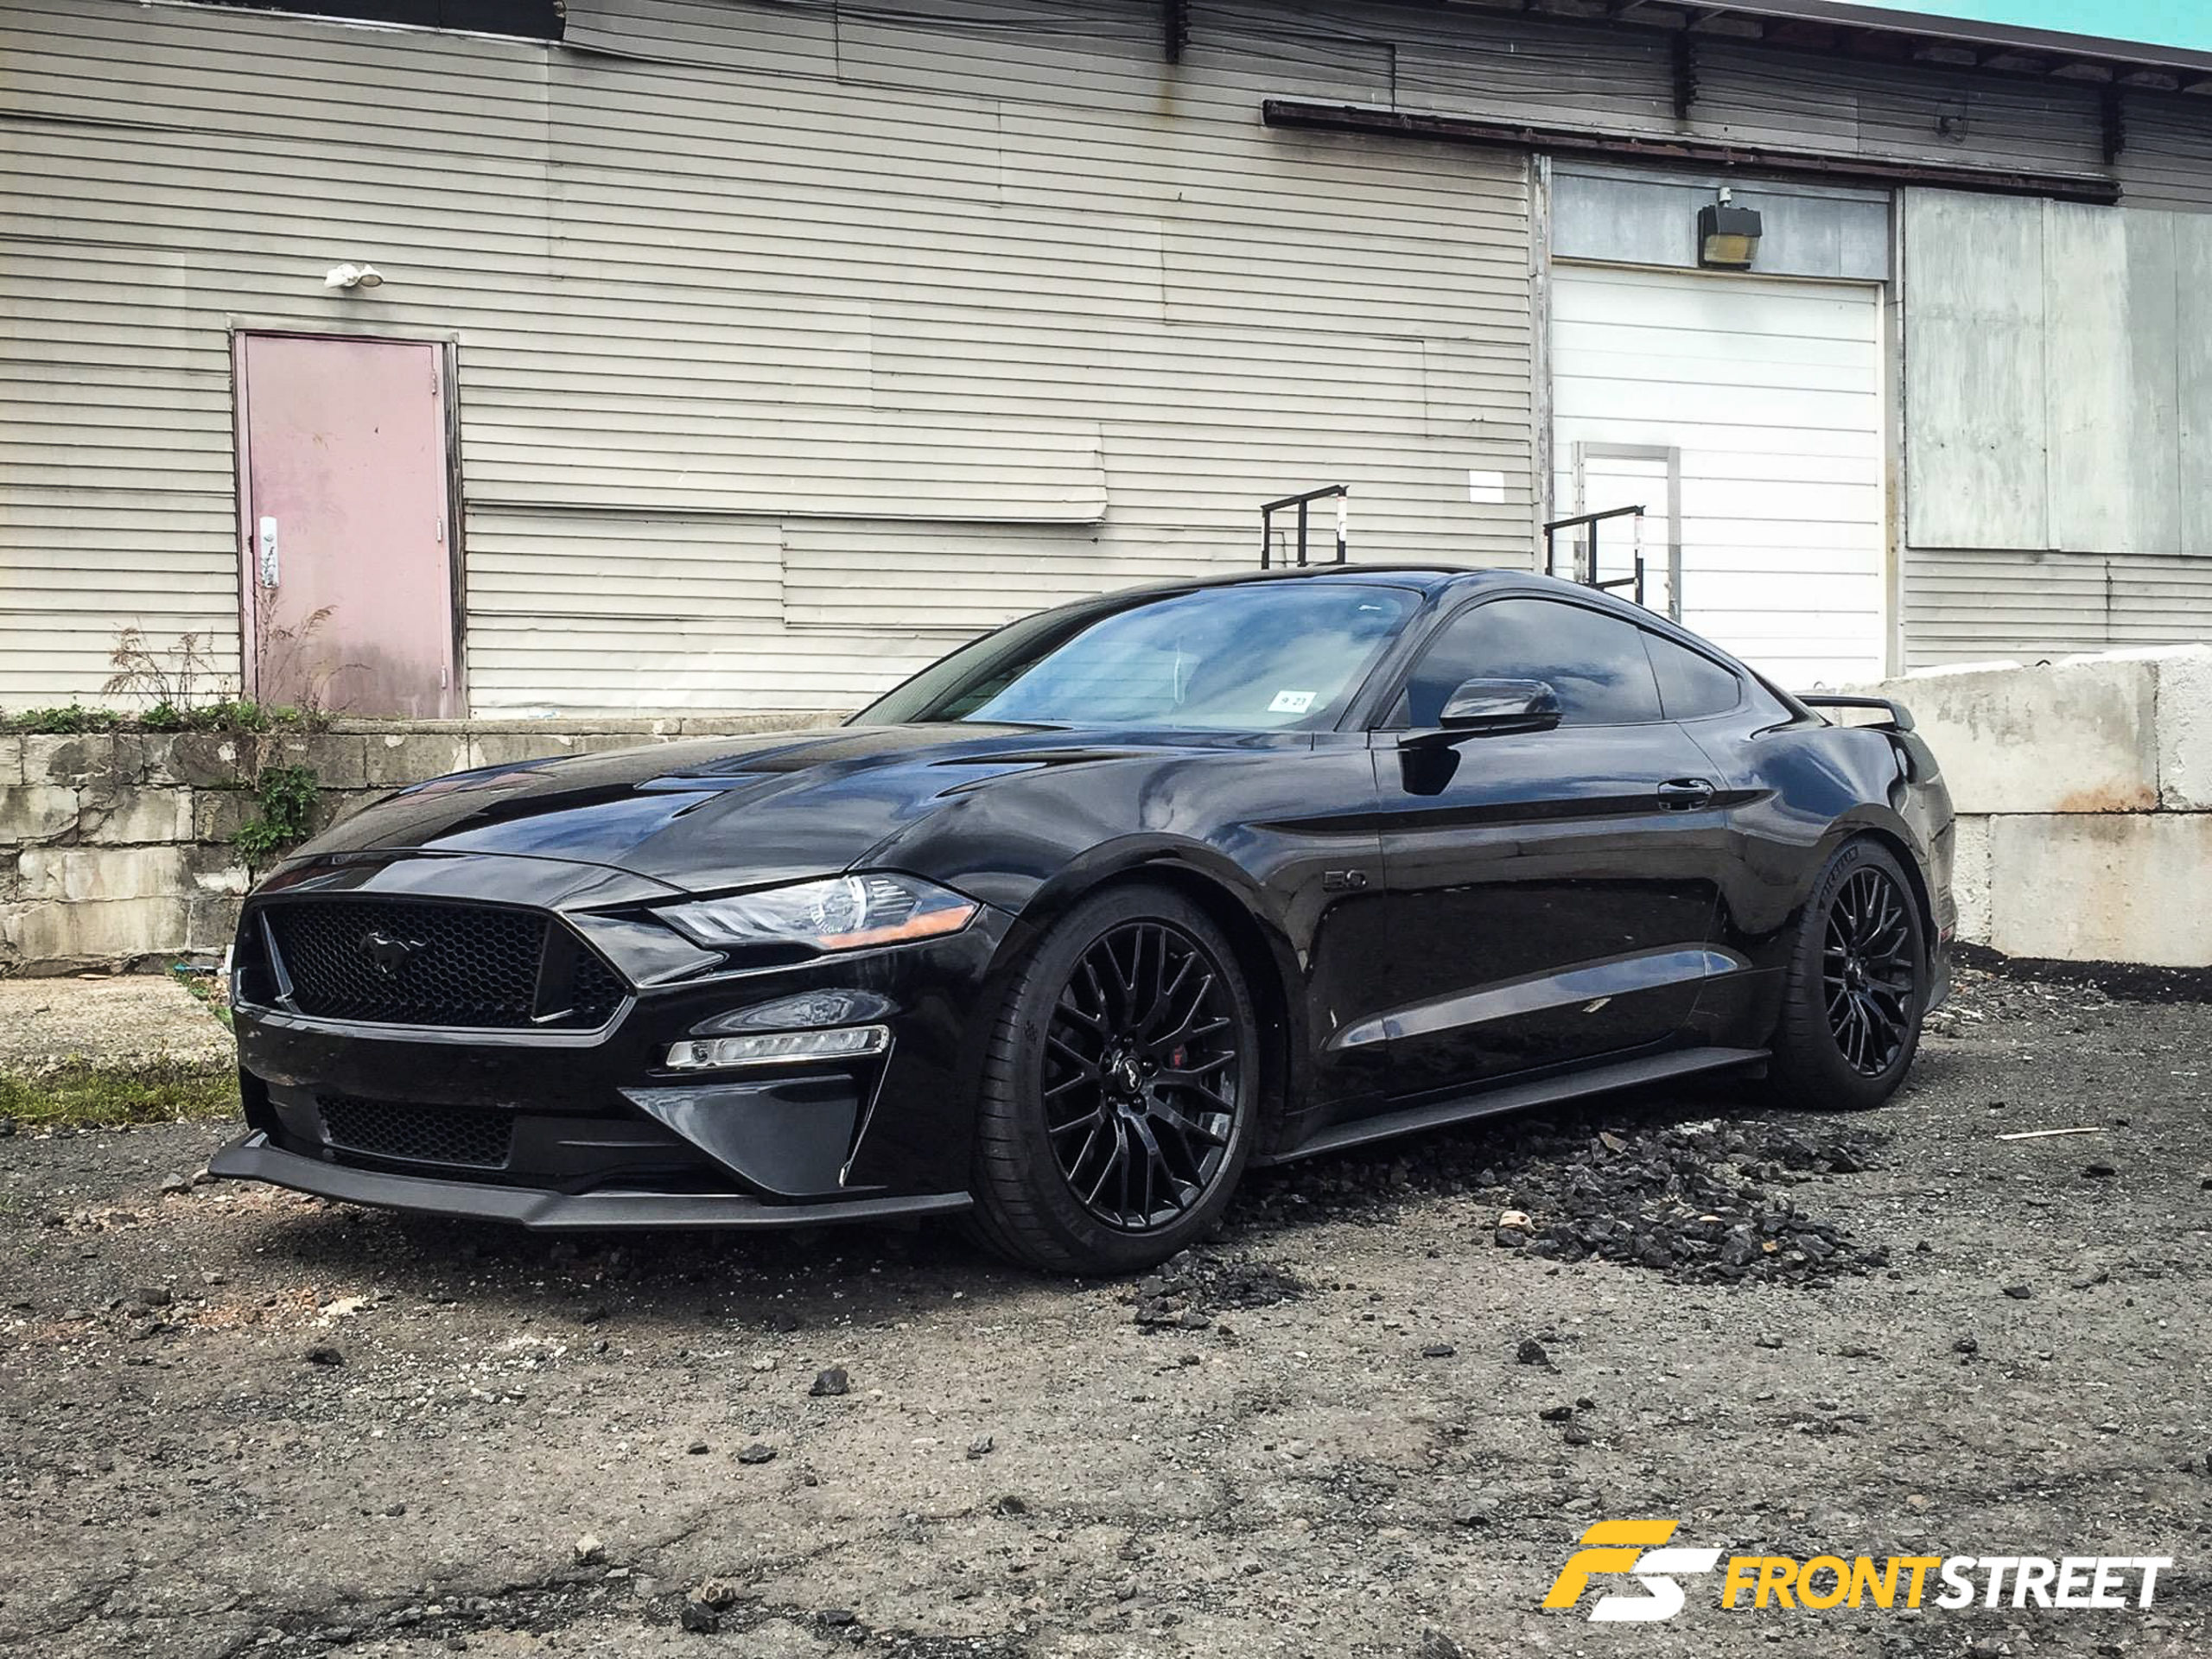 This Twin-Turbo Mustang Makes 1,047 Rear-Wheel Horsepower On Pump Gas!